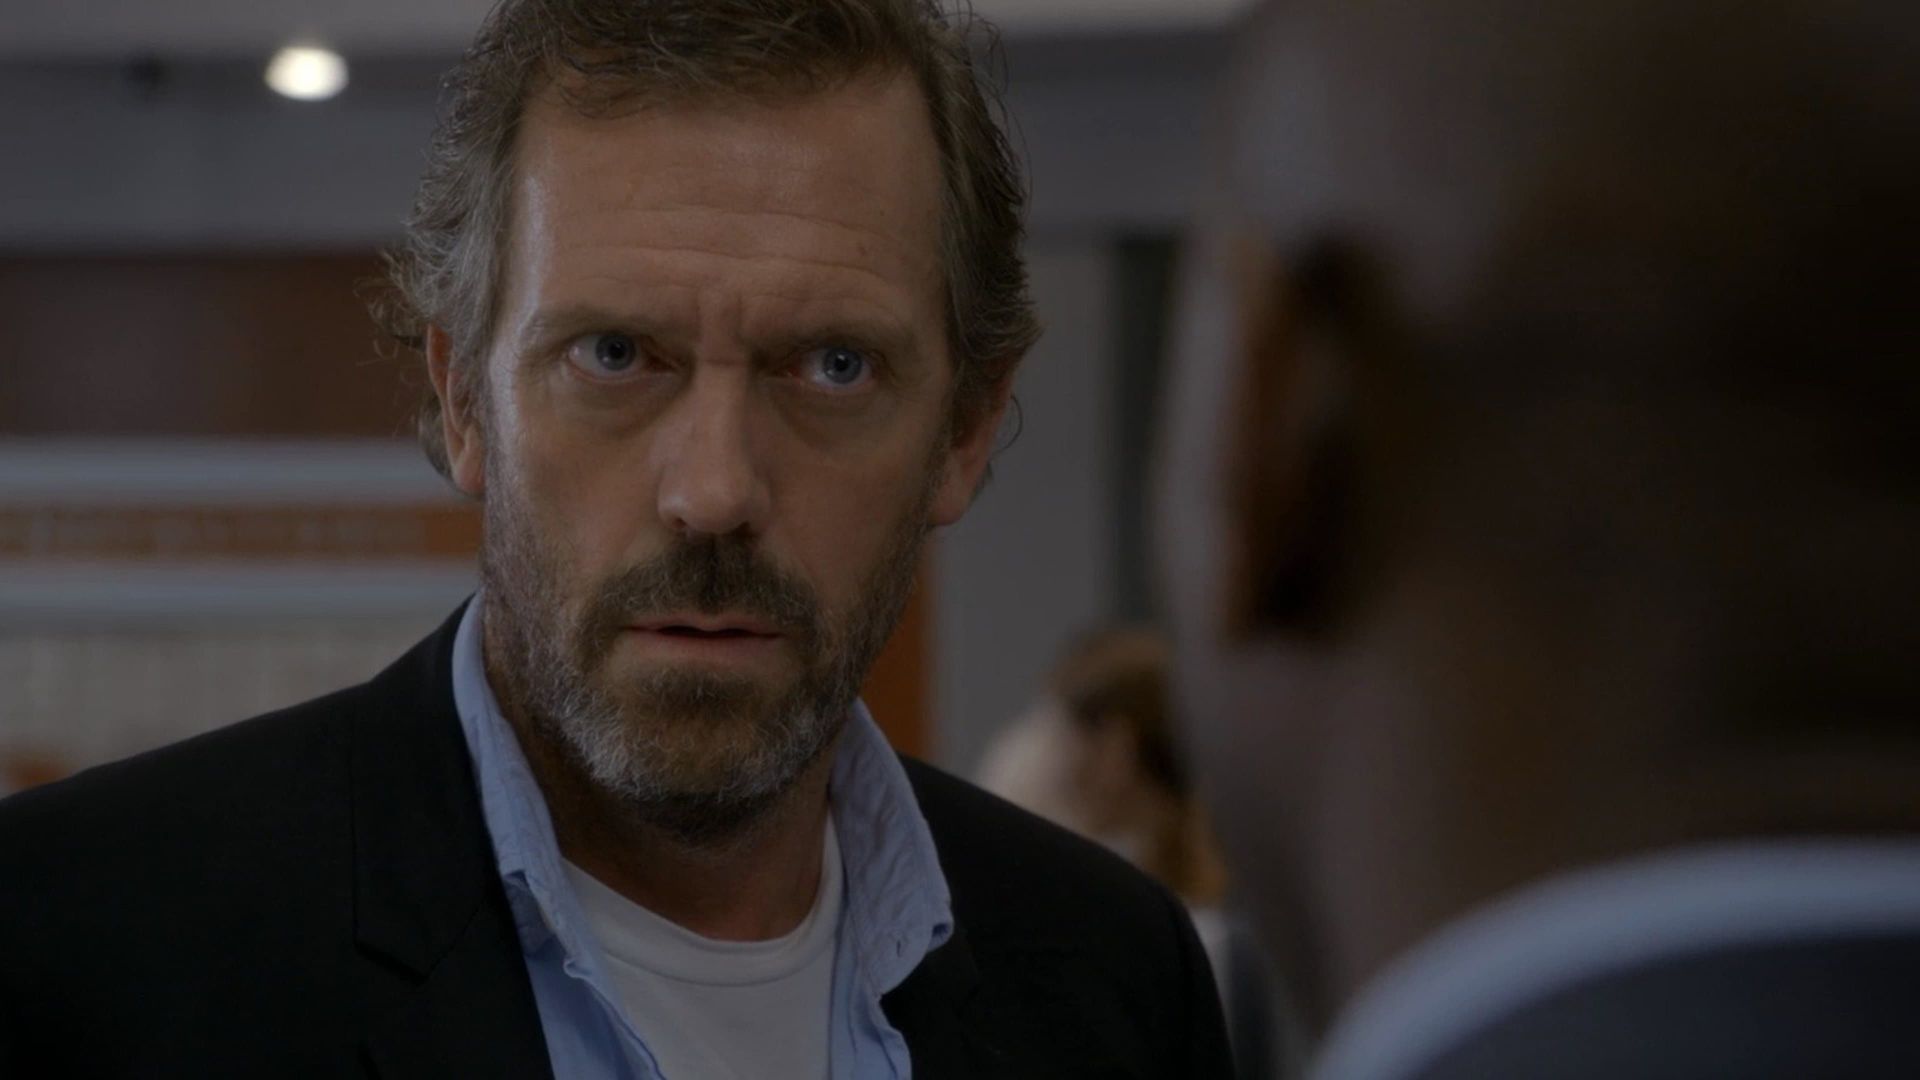 House M.D. background